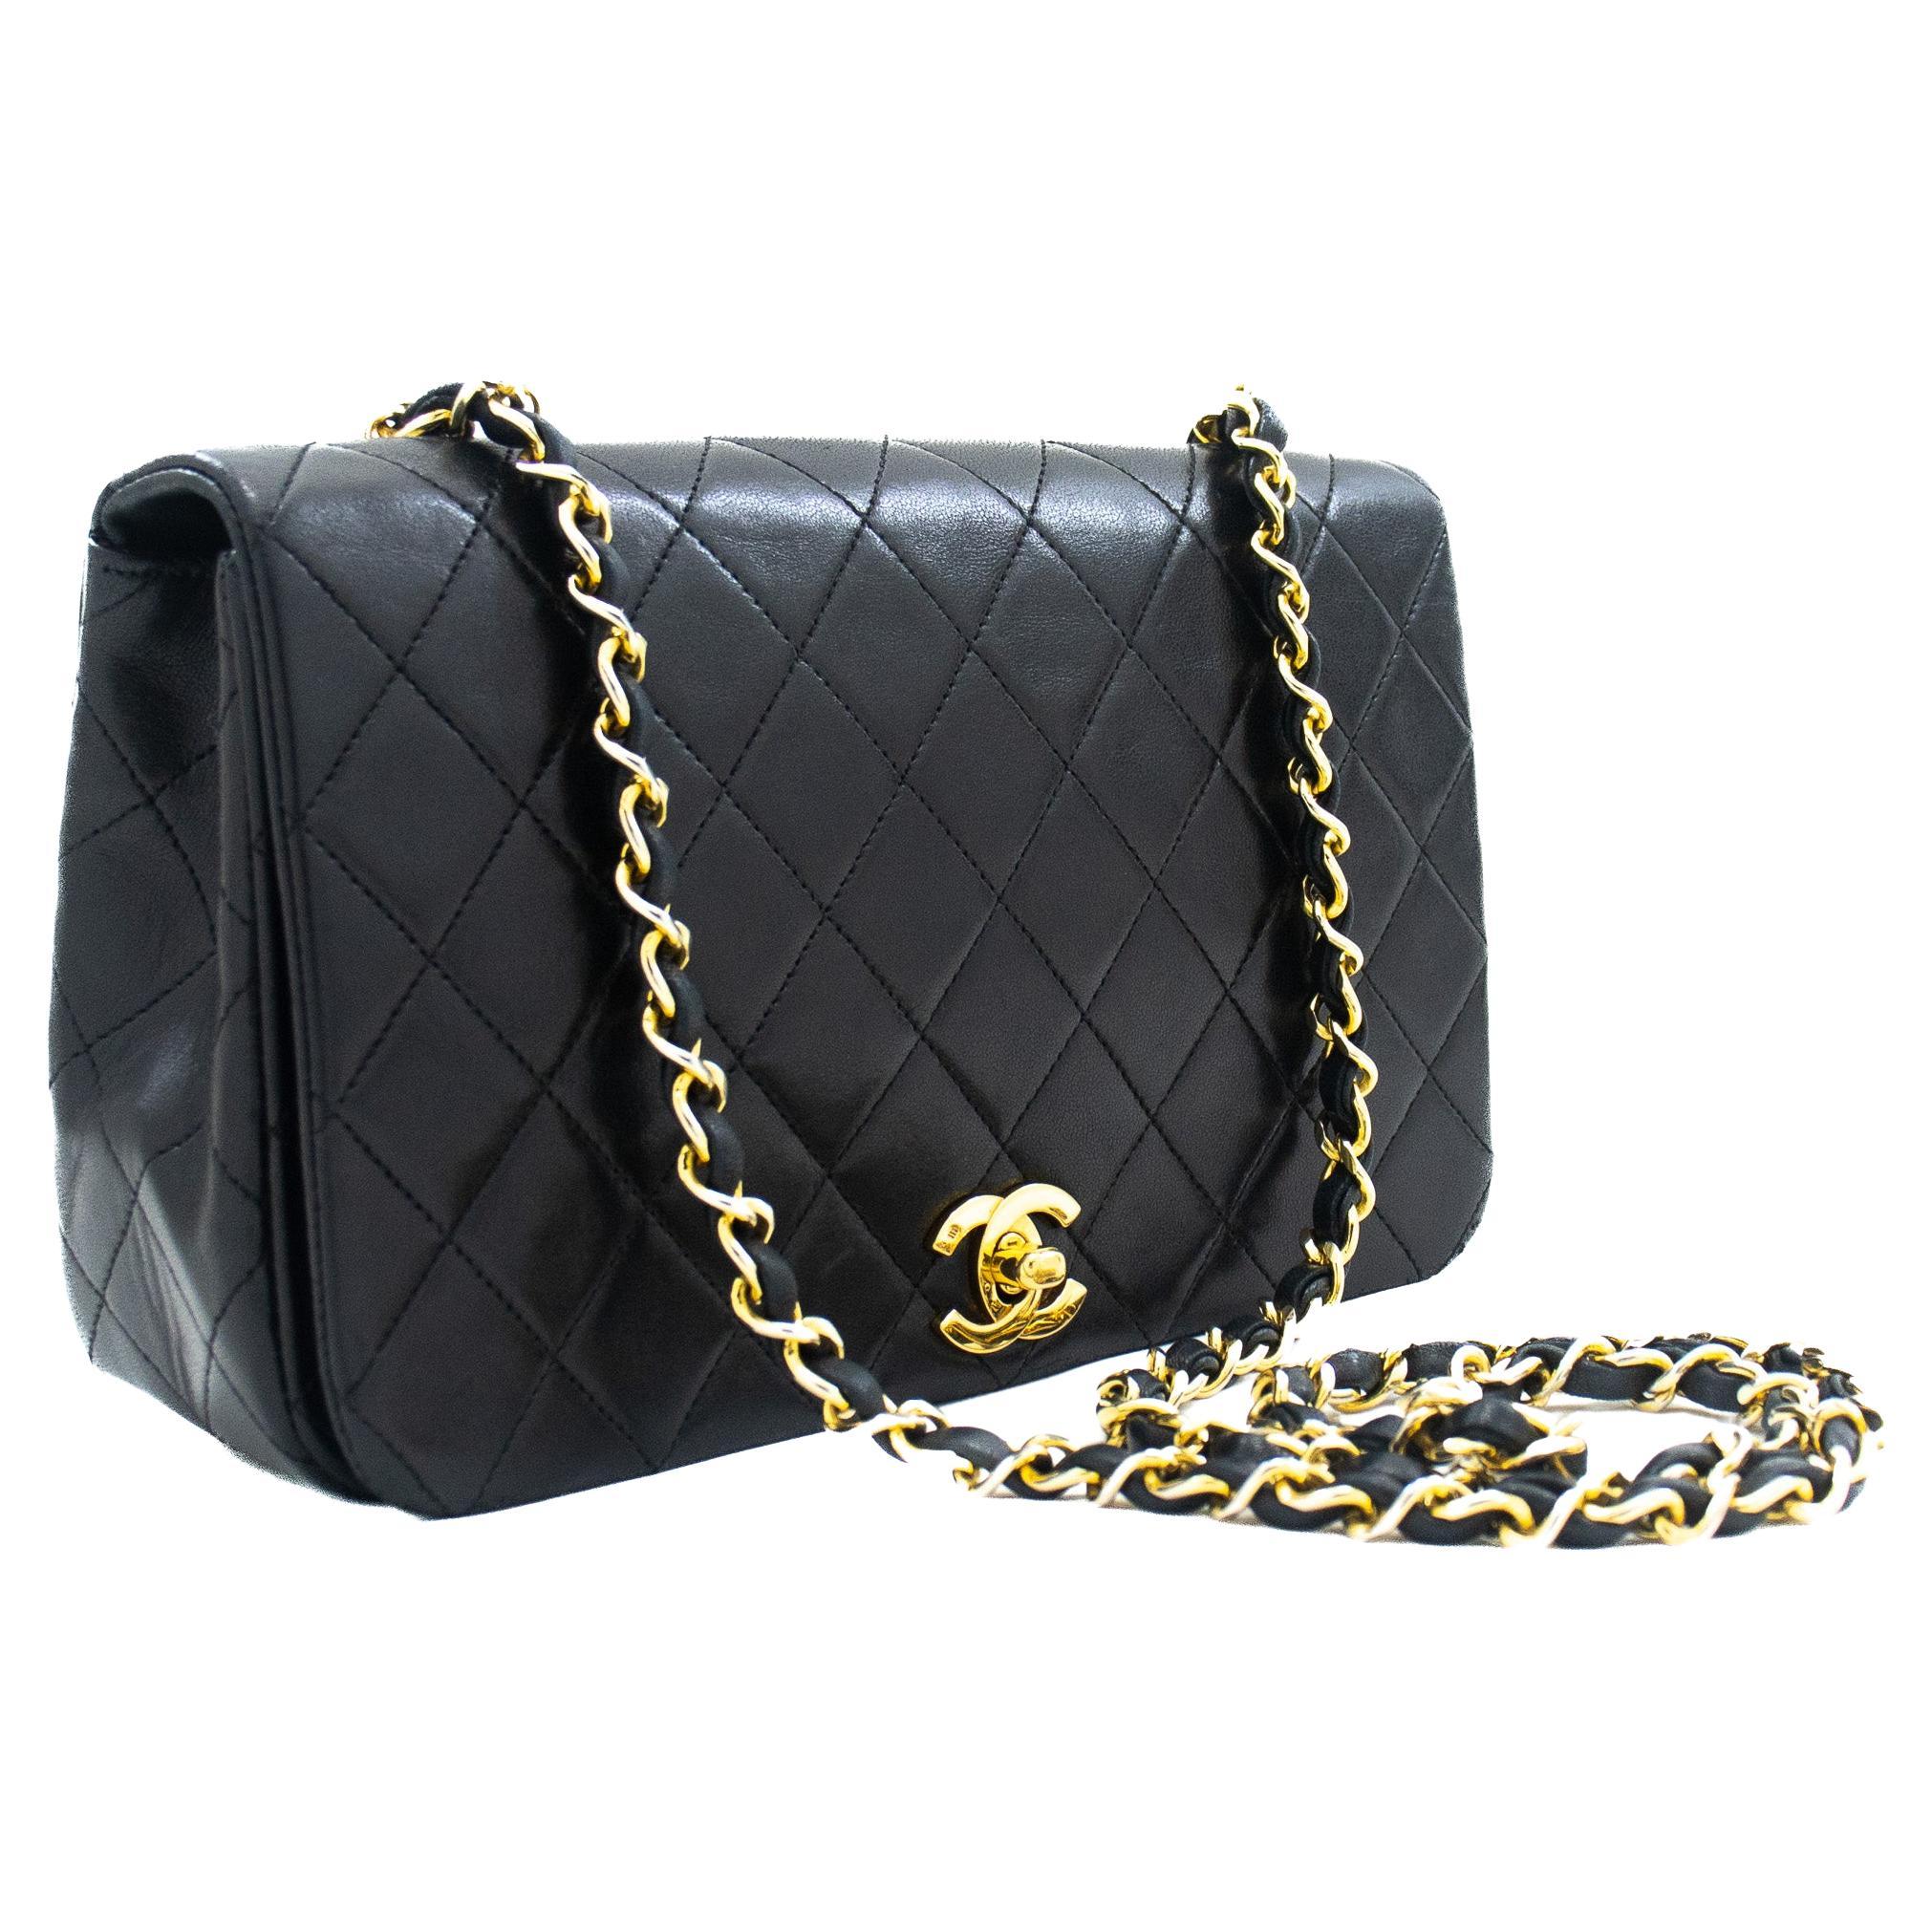 CHANEL Full Chain Flap Shoulder Bag Black Quilted Purse Lambskin For Sale